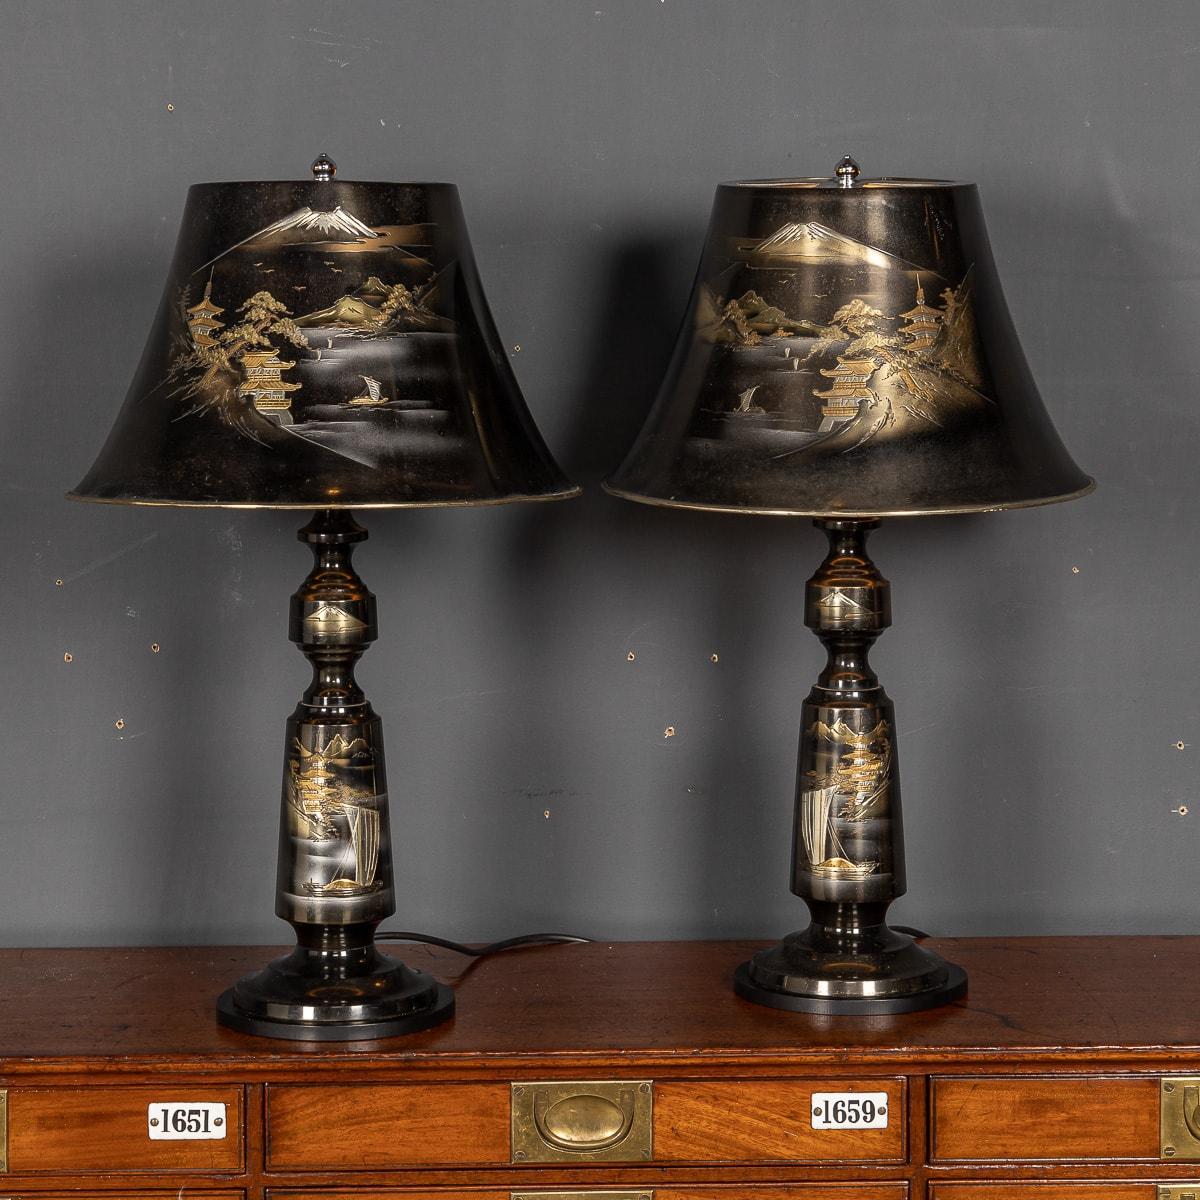 A stunning pair of mid 20th Century Japanese table lamps in a traditional black lacquered finish with a delicate depiction of Mount Fuji in gold and silver.

CONDITION
In Great Condition - No Damage.

SIZE
Shade diameter: 35.5cm
Shade Height: